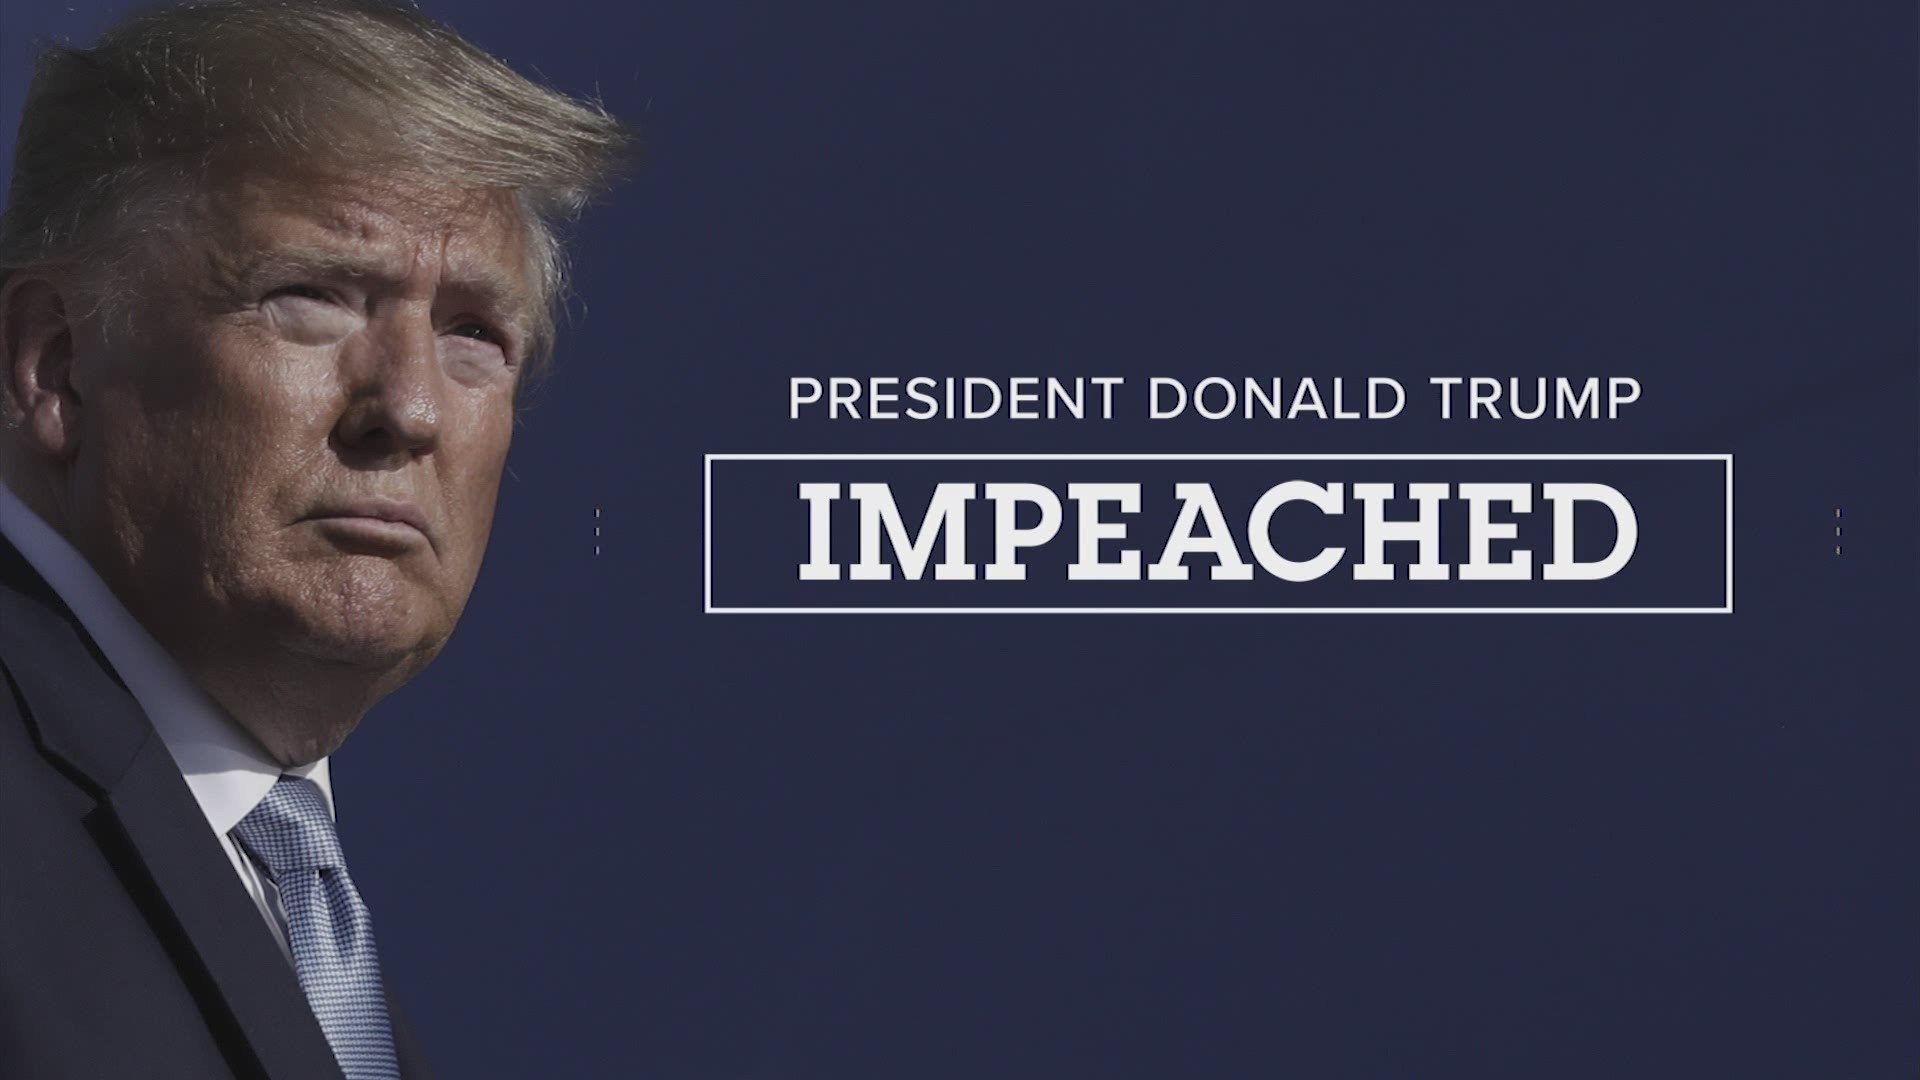 After several hours of passionate debate, U.S. House members voted to impeach Trump, making him the first president to be impeached twice.